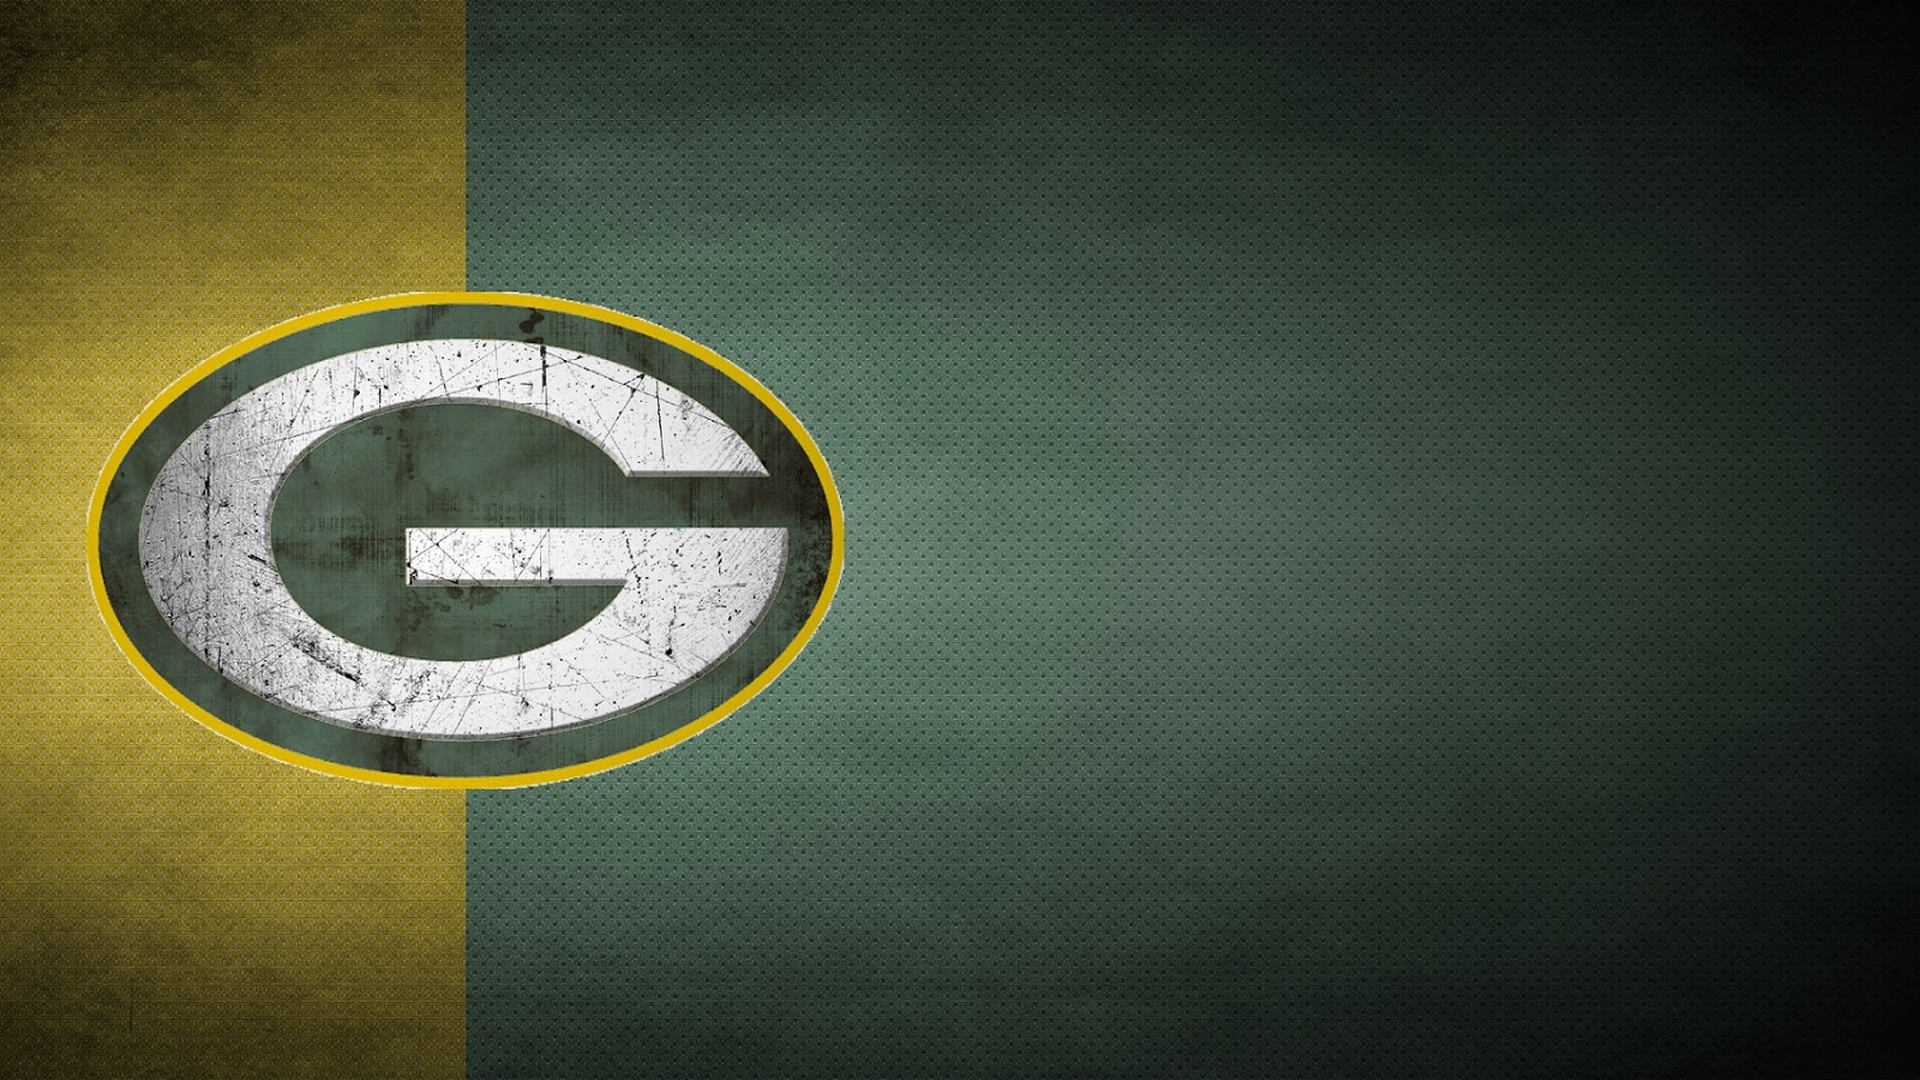 Green Bay Packers Wallpaper For Mac Backgrounds 1920x1080